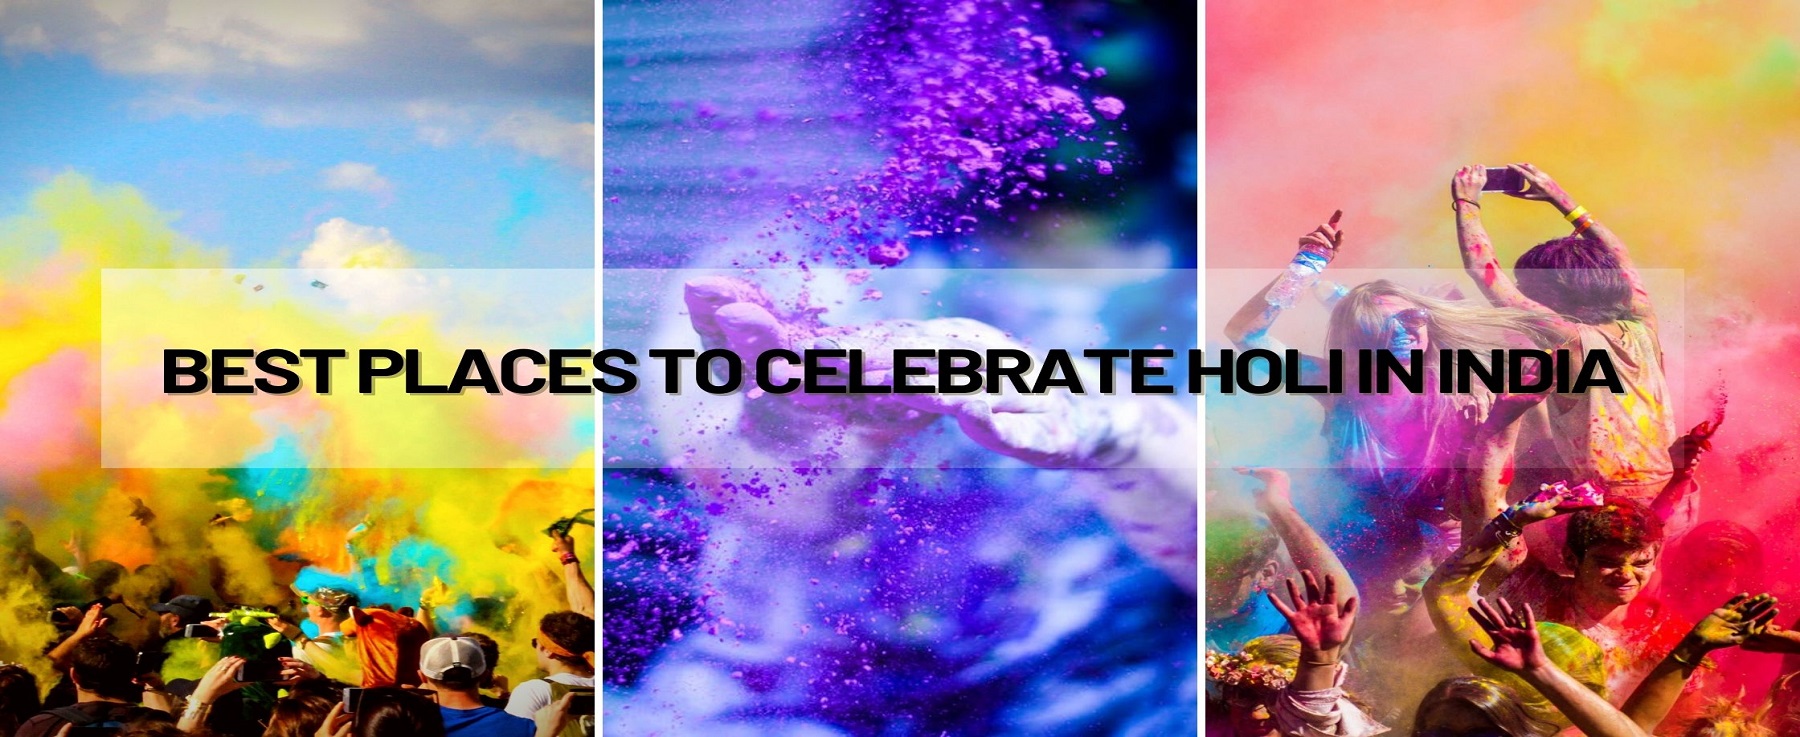 Best Places To Celebrate Holi In India 